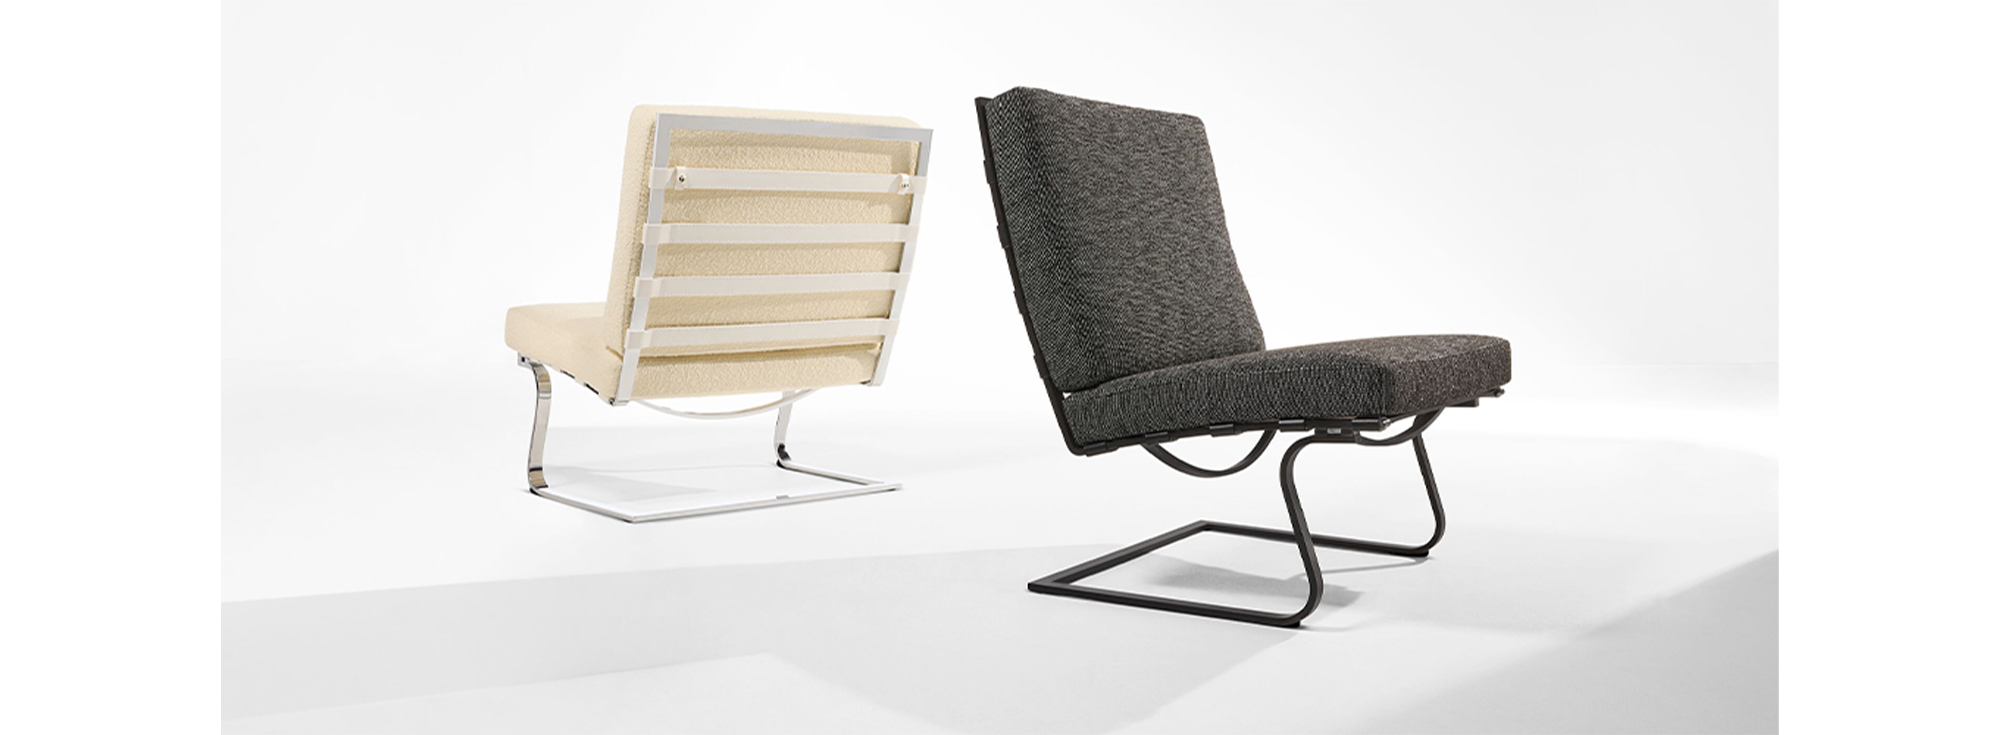 Tugendhat Chair by Mies van der Rohe